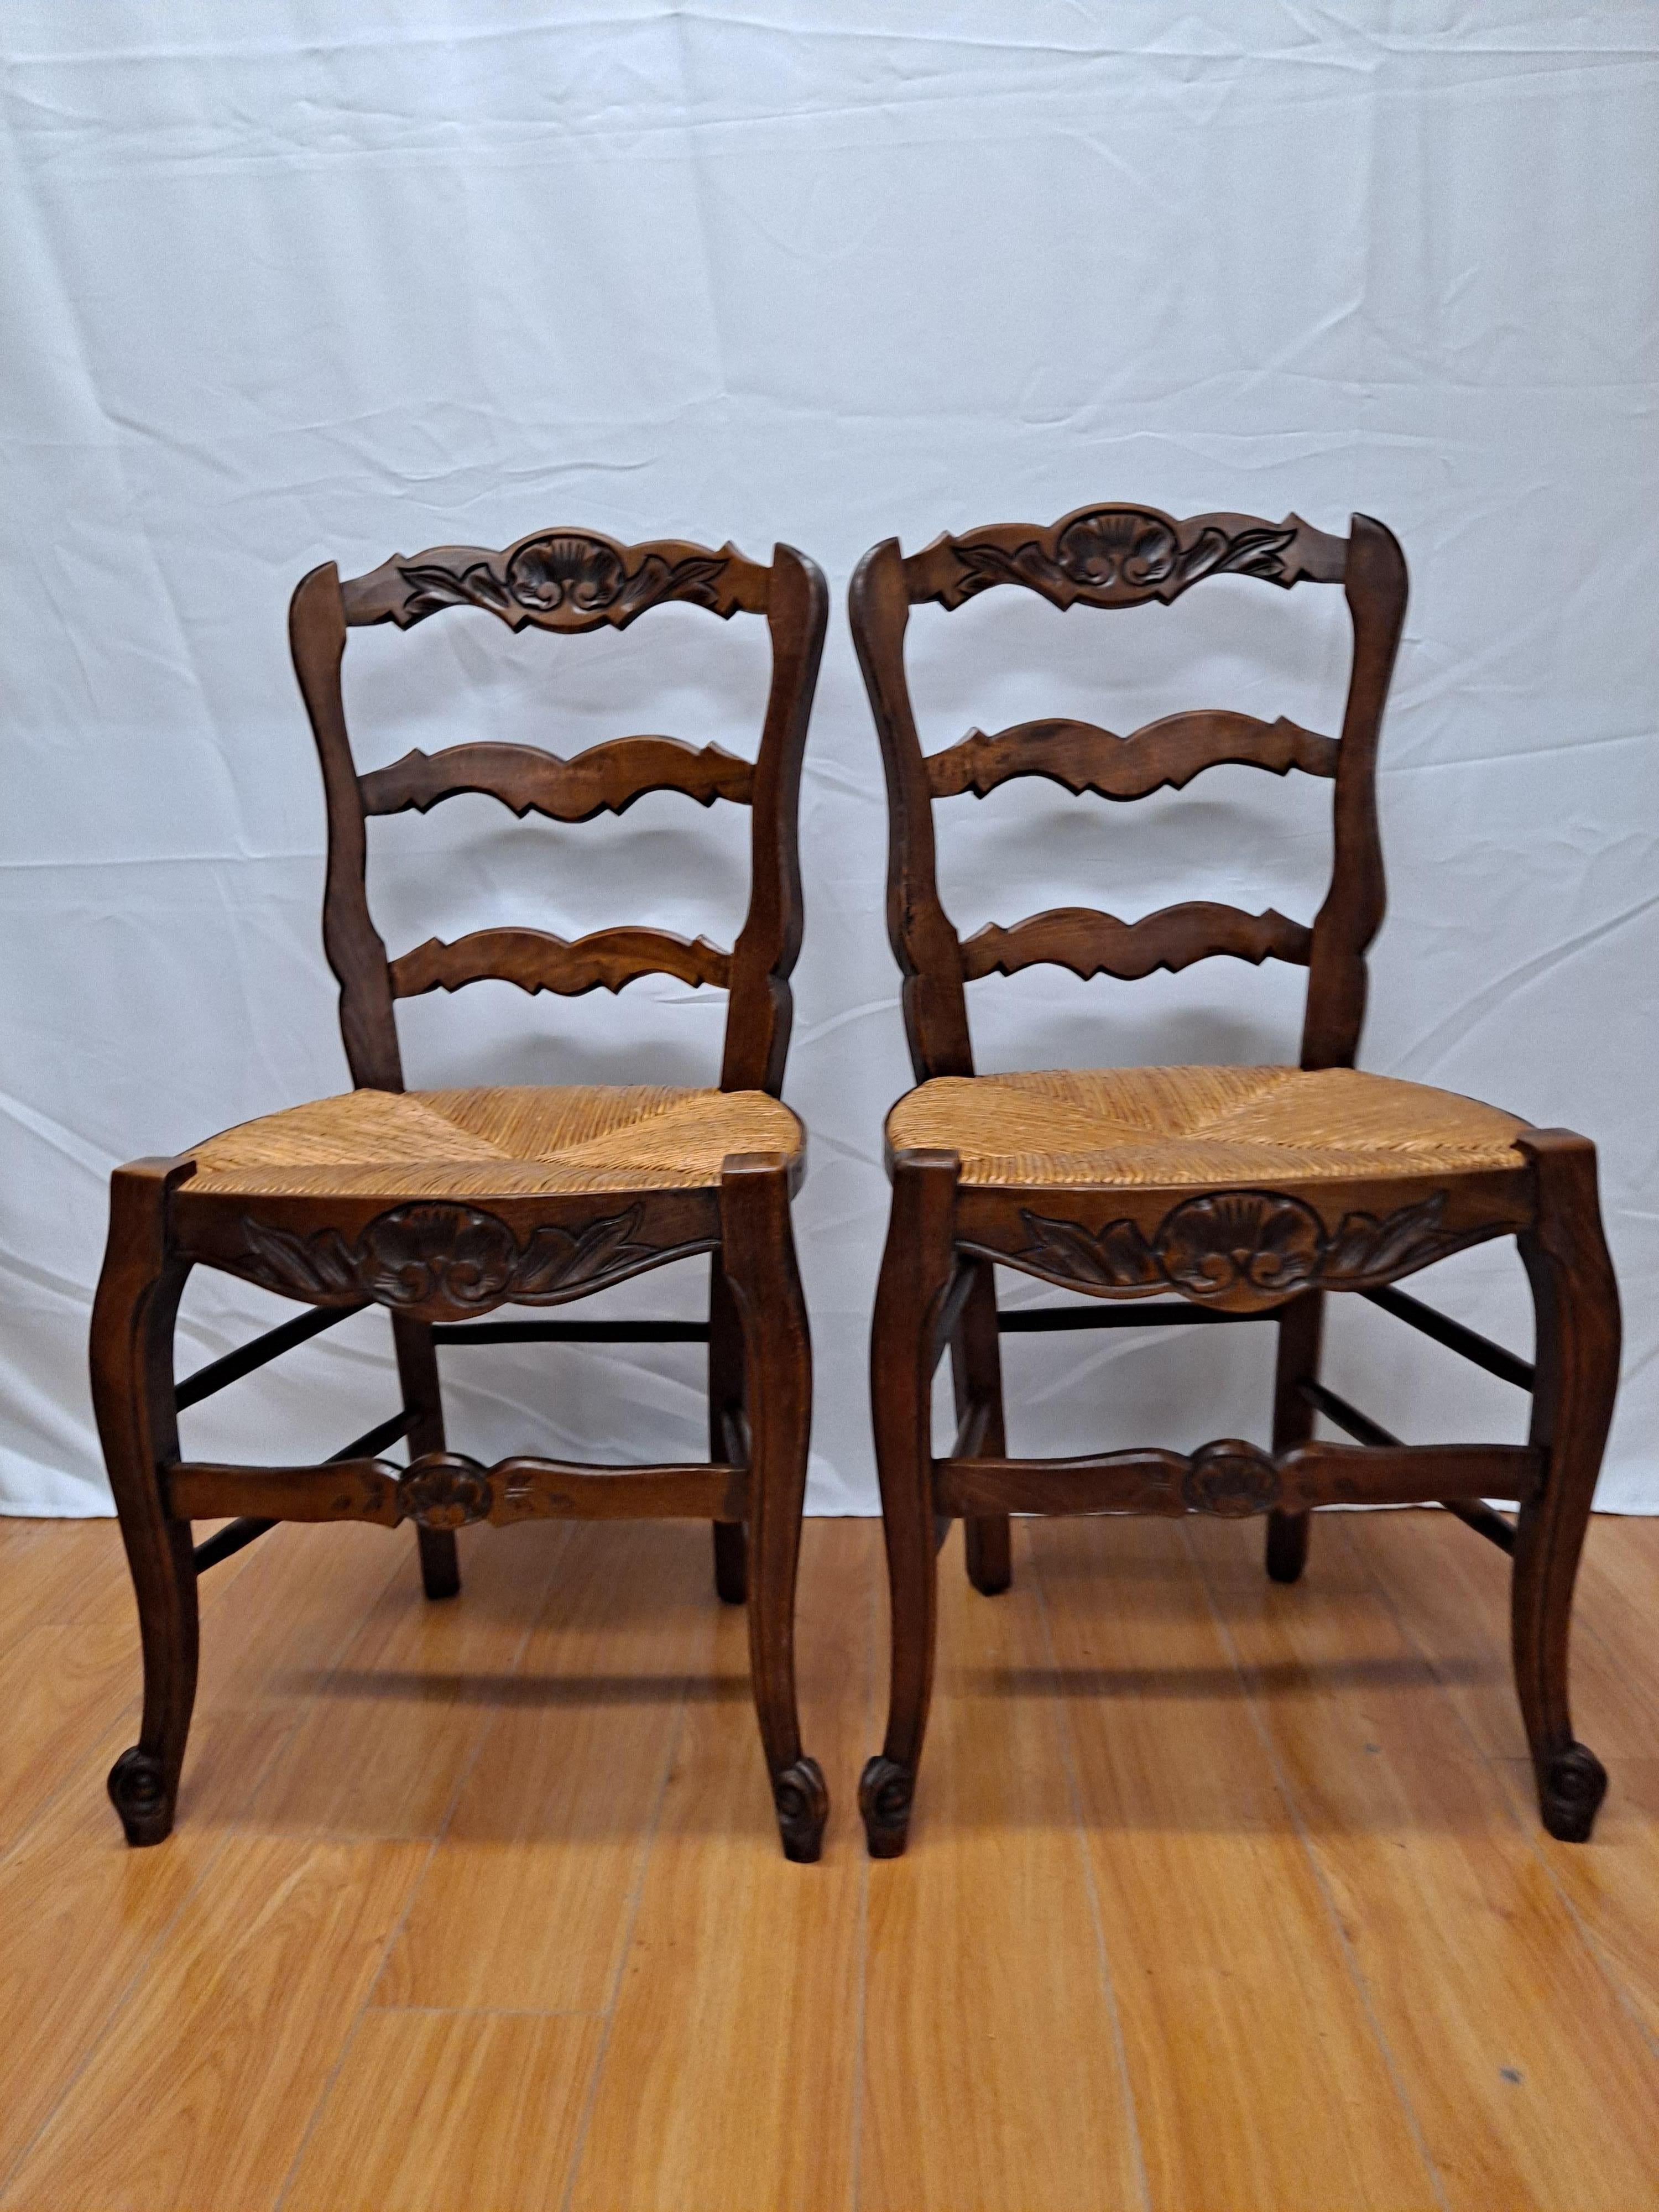 Set of 8 French Provincial dining side chairs with rush seats, ladder backs, and beautifully hand carved traditional floral motifs. Wood is most likely walnut, but possibly oak.